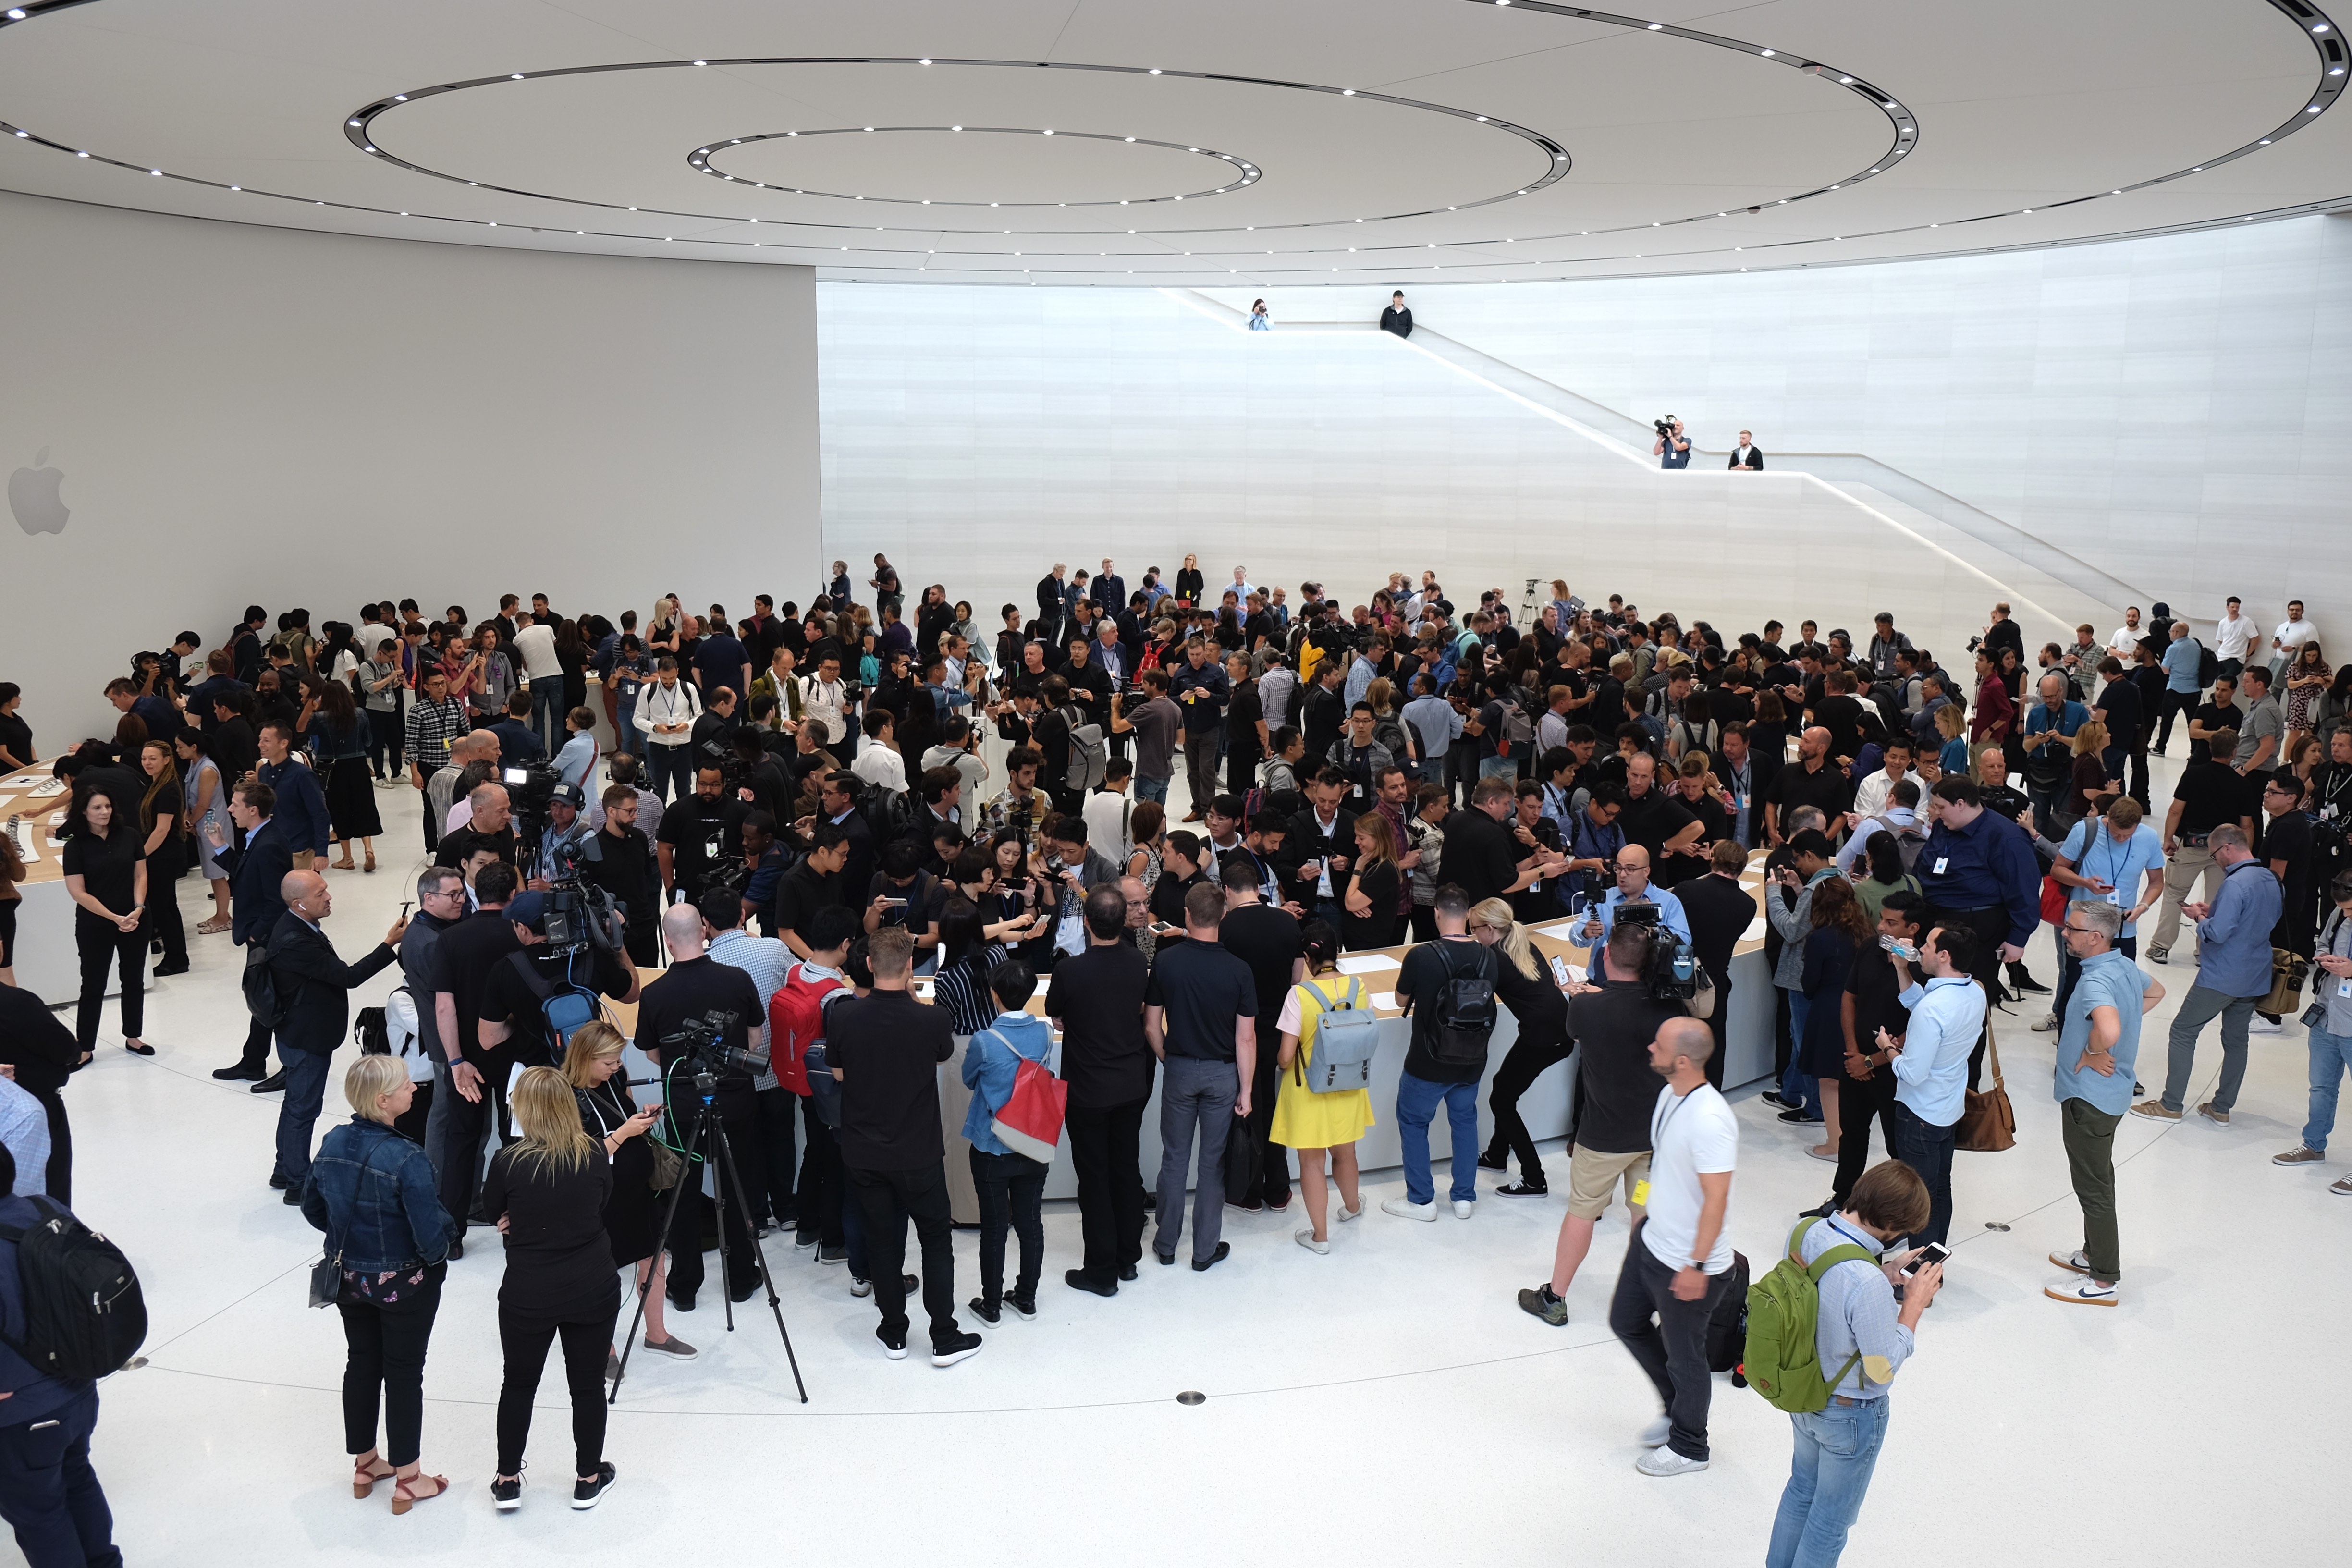 A crowd of people entering the Steve Jobs Theater at Apple Park for the iPhone X event on Sept. 12, 2017